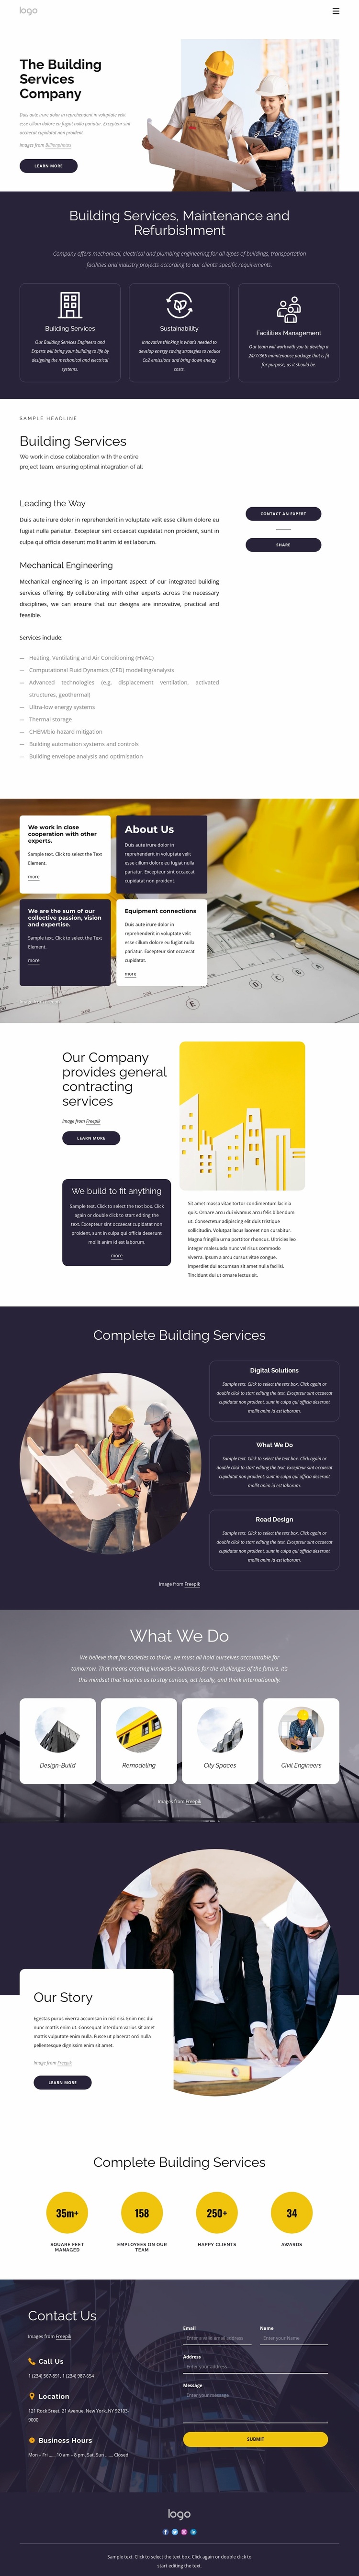 The building services company Website Design